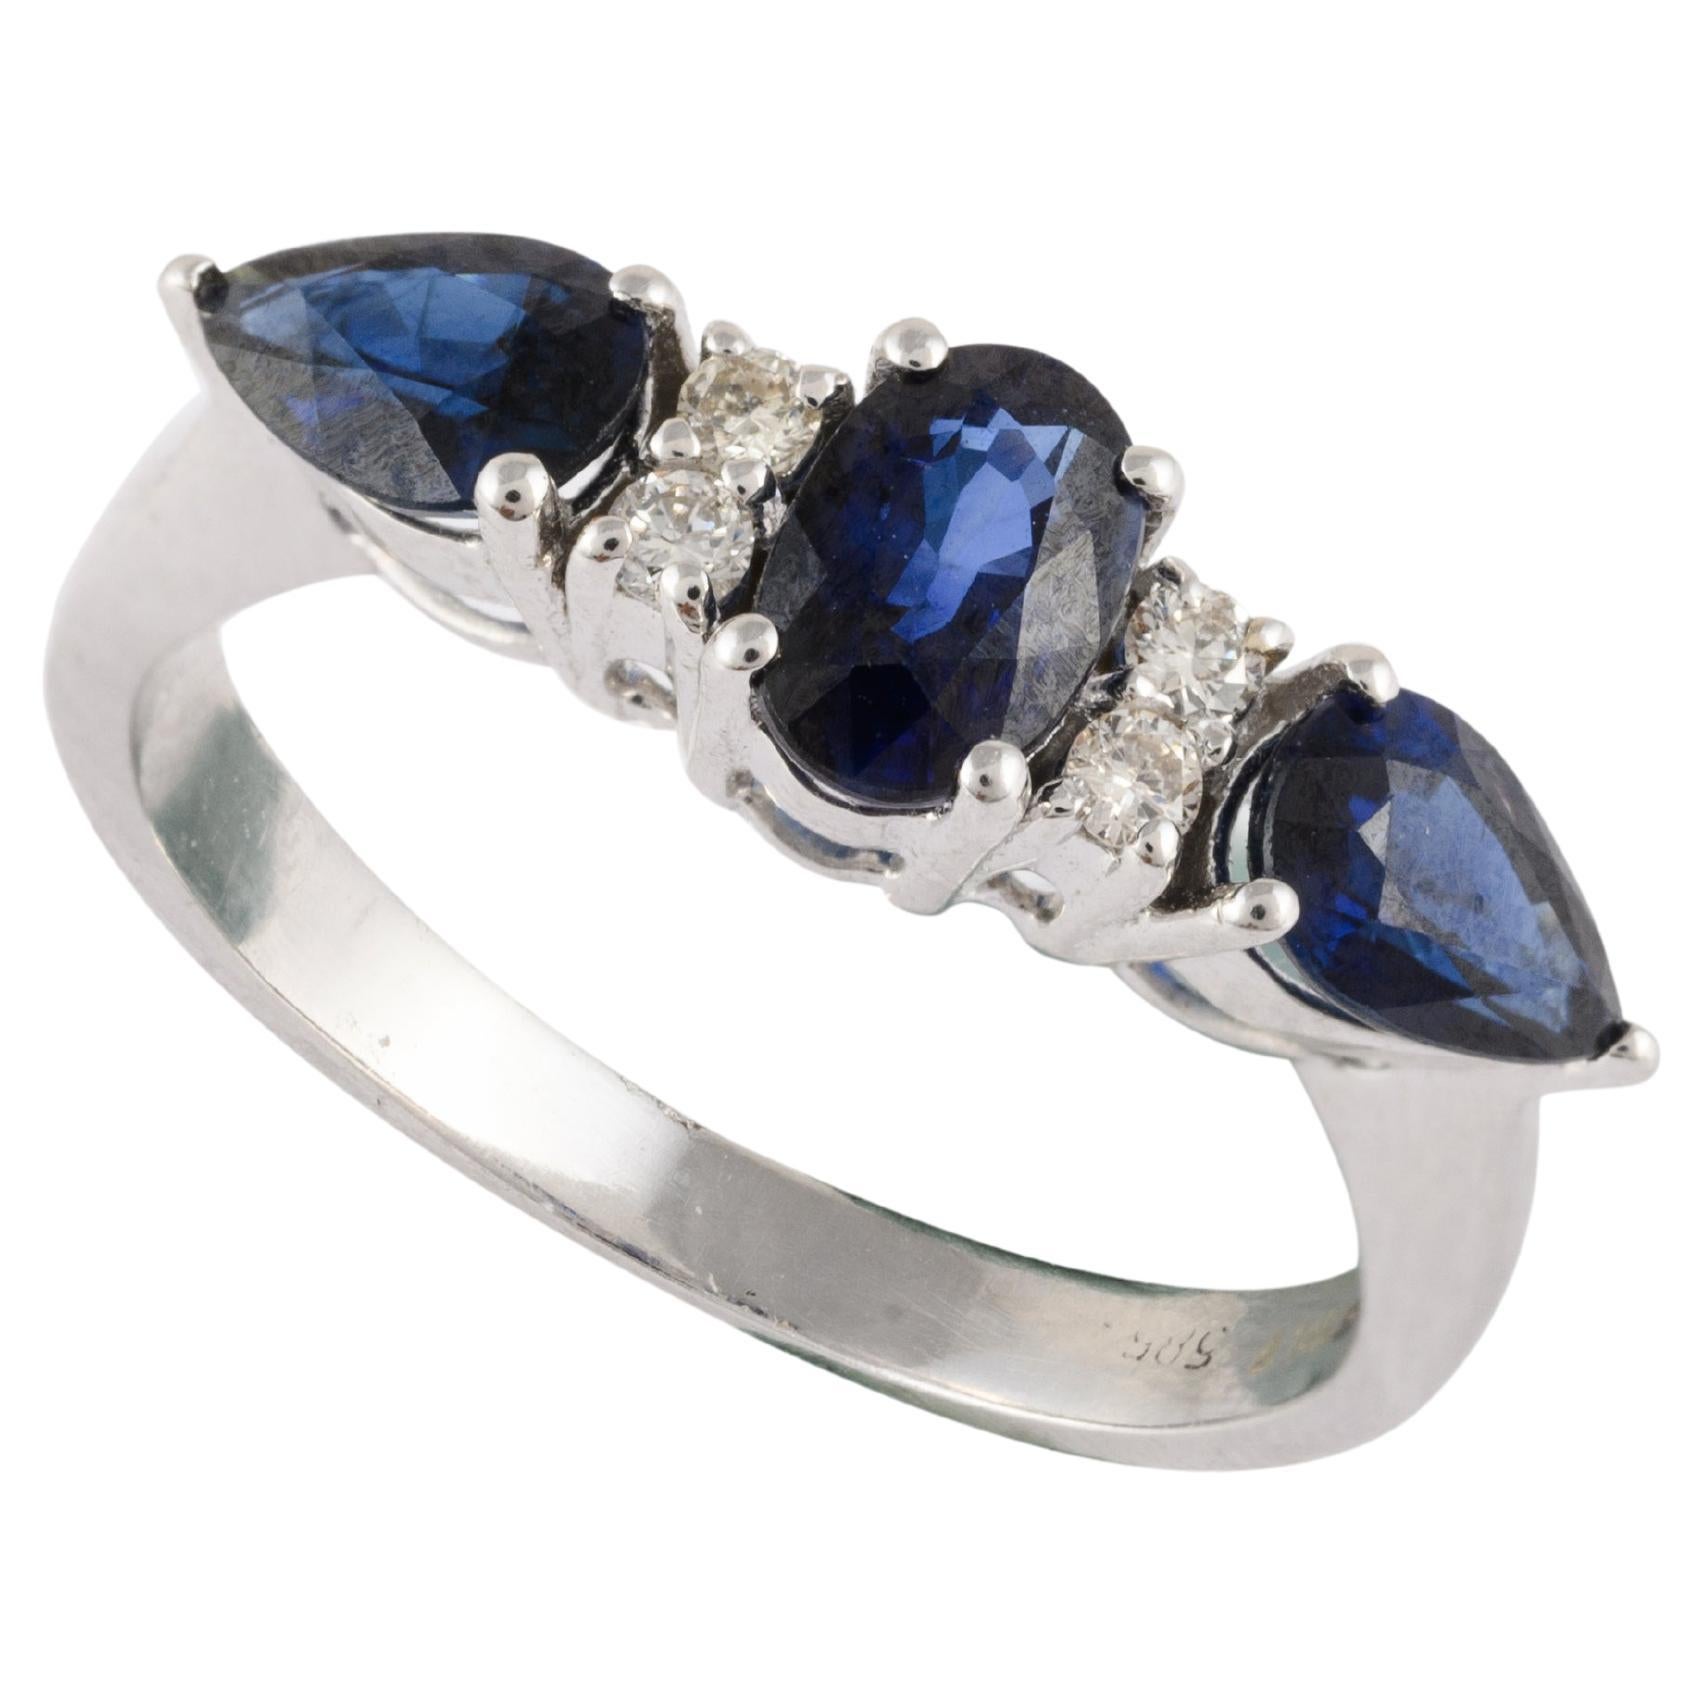 Gorgeous Sapphire Diamond Engagement Ring in 14k Solid White Gold For Her